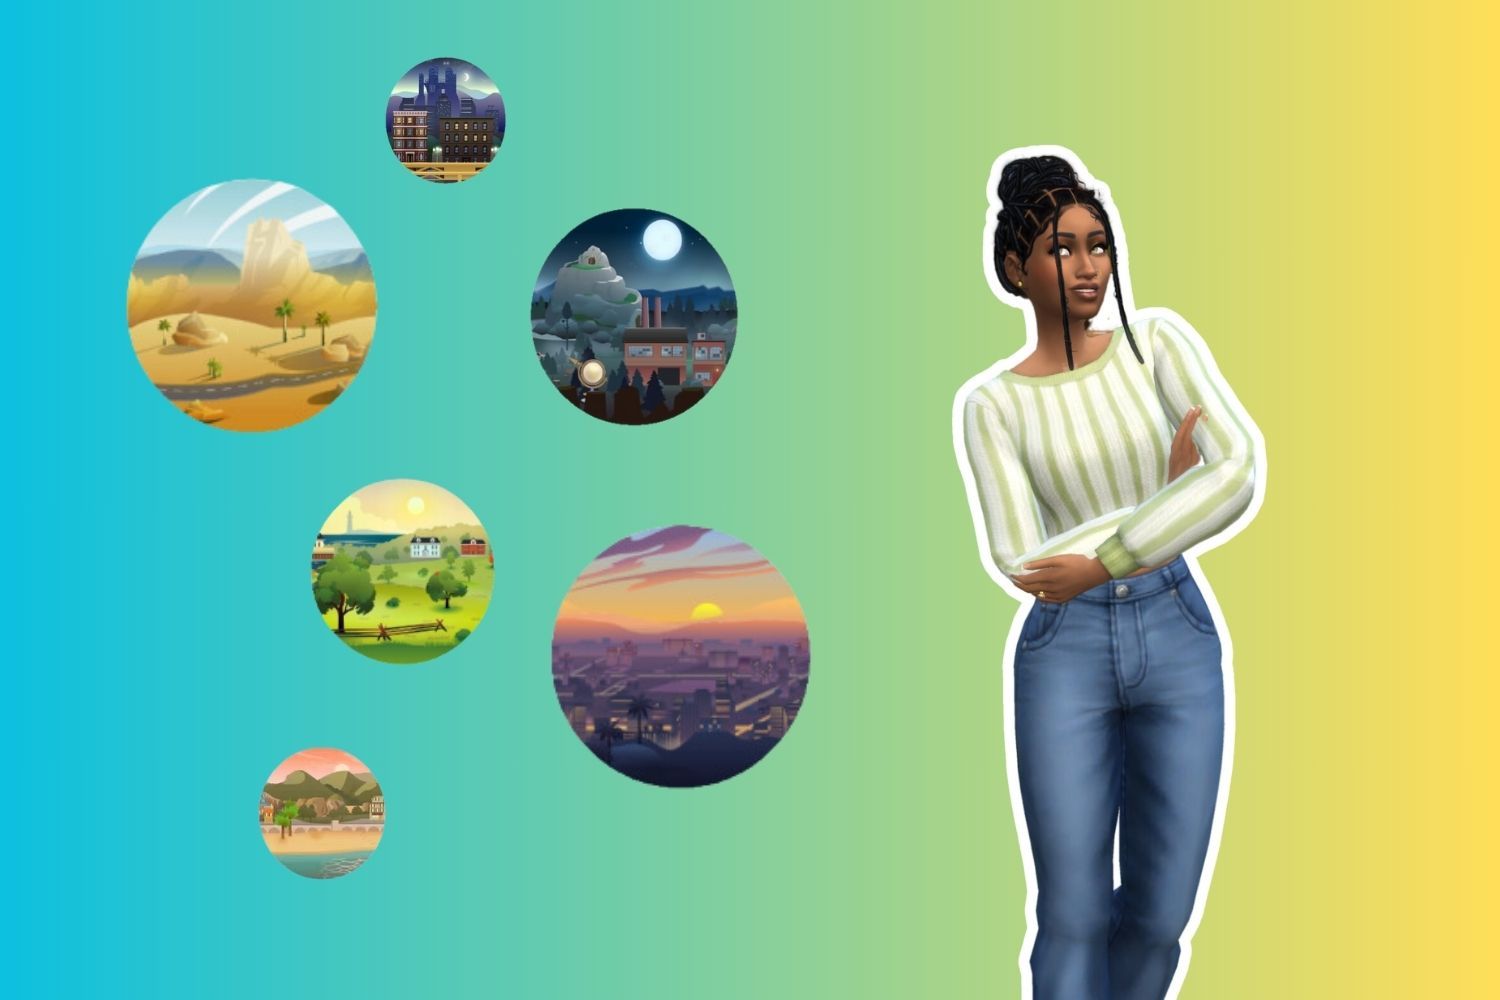 A dark-haired feminine Sim stands against a blue/green ombre background, looking over at icons representing different lands in The Sims 4.